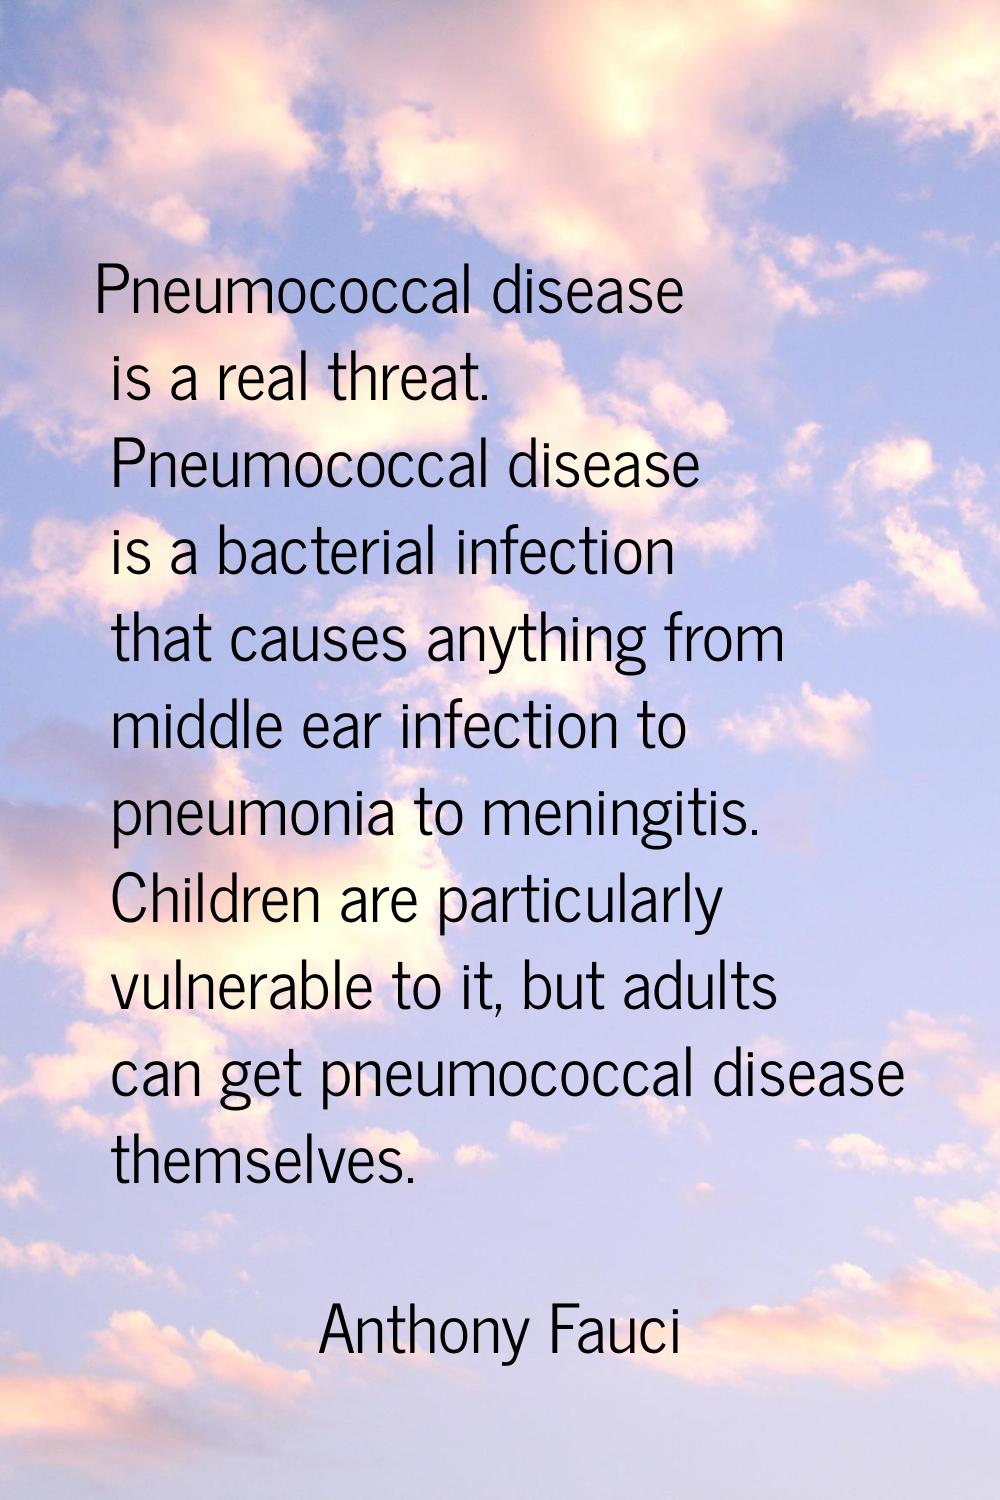 Pneumococcal disease is a real threat. Pneumococcal disease is a bacterial infection that causes an